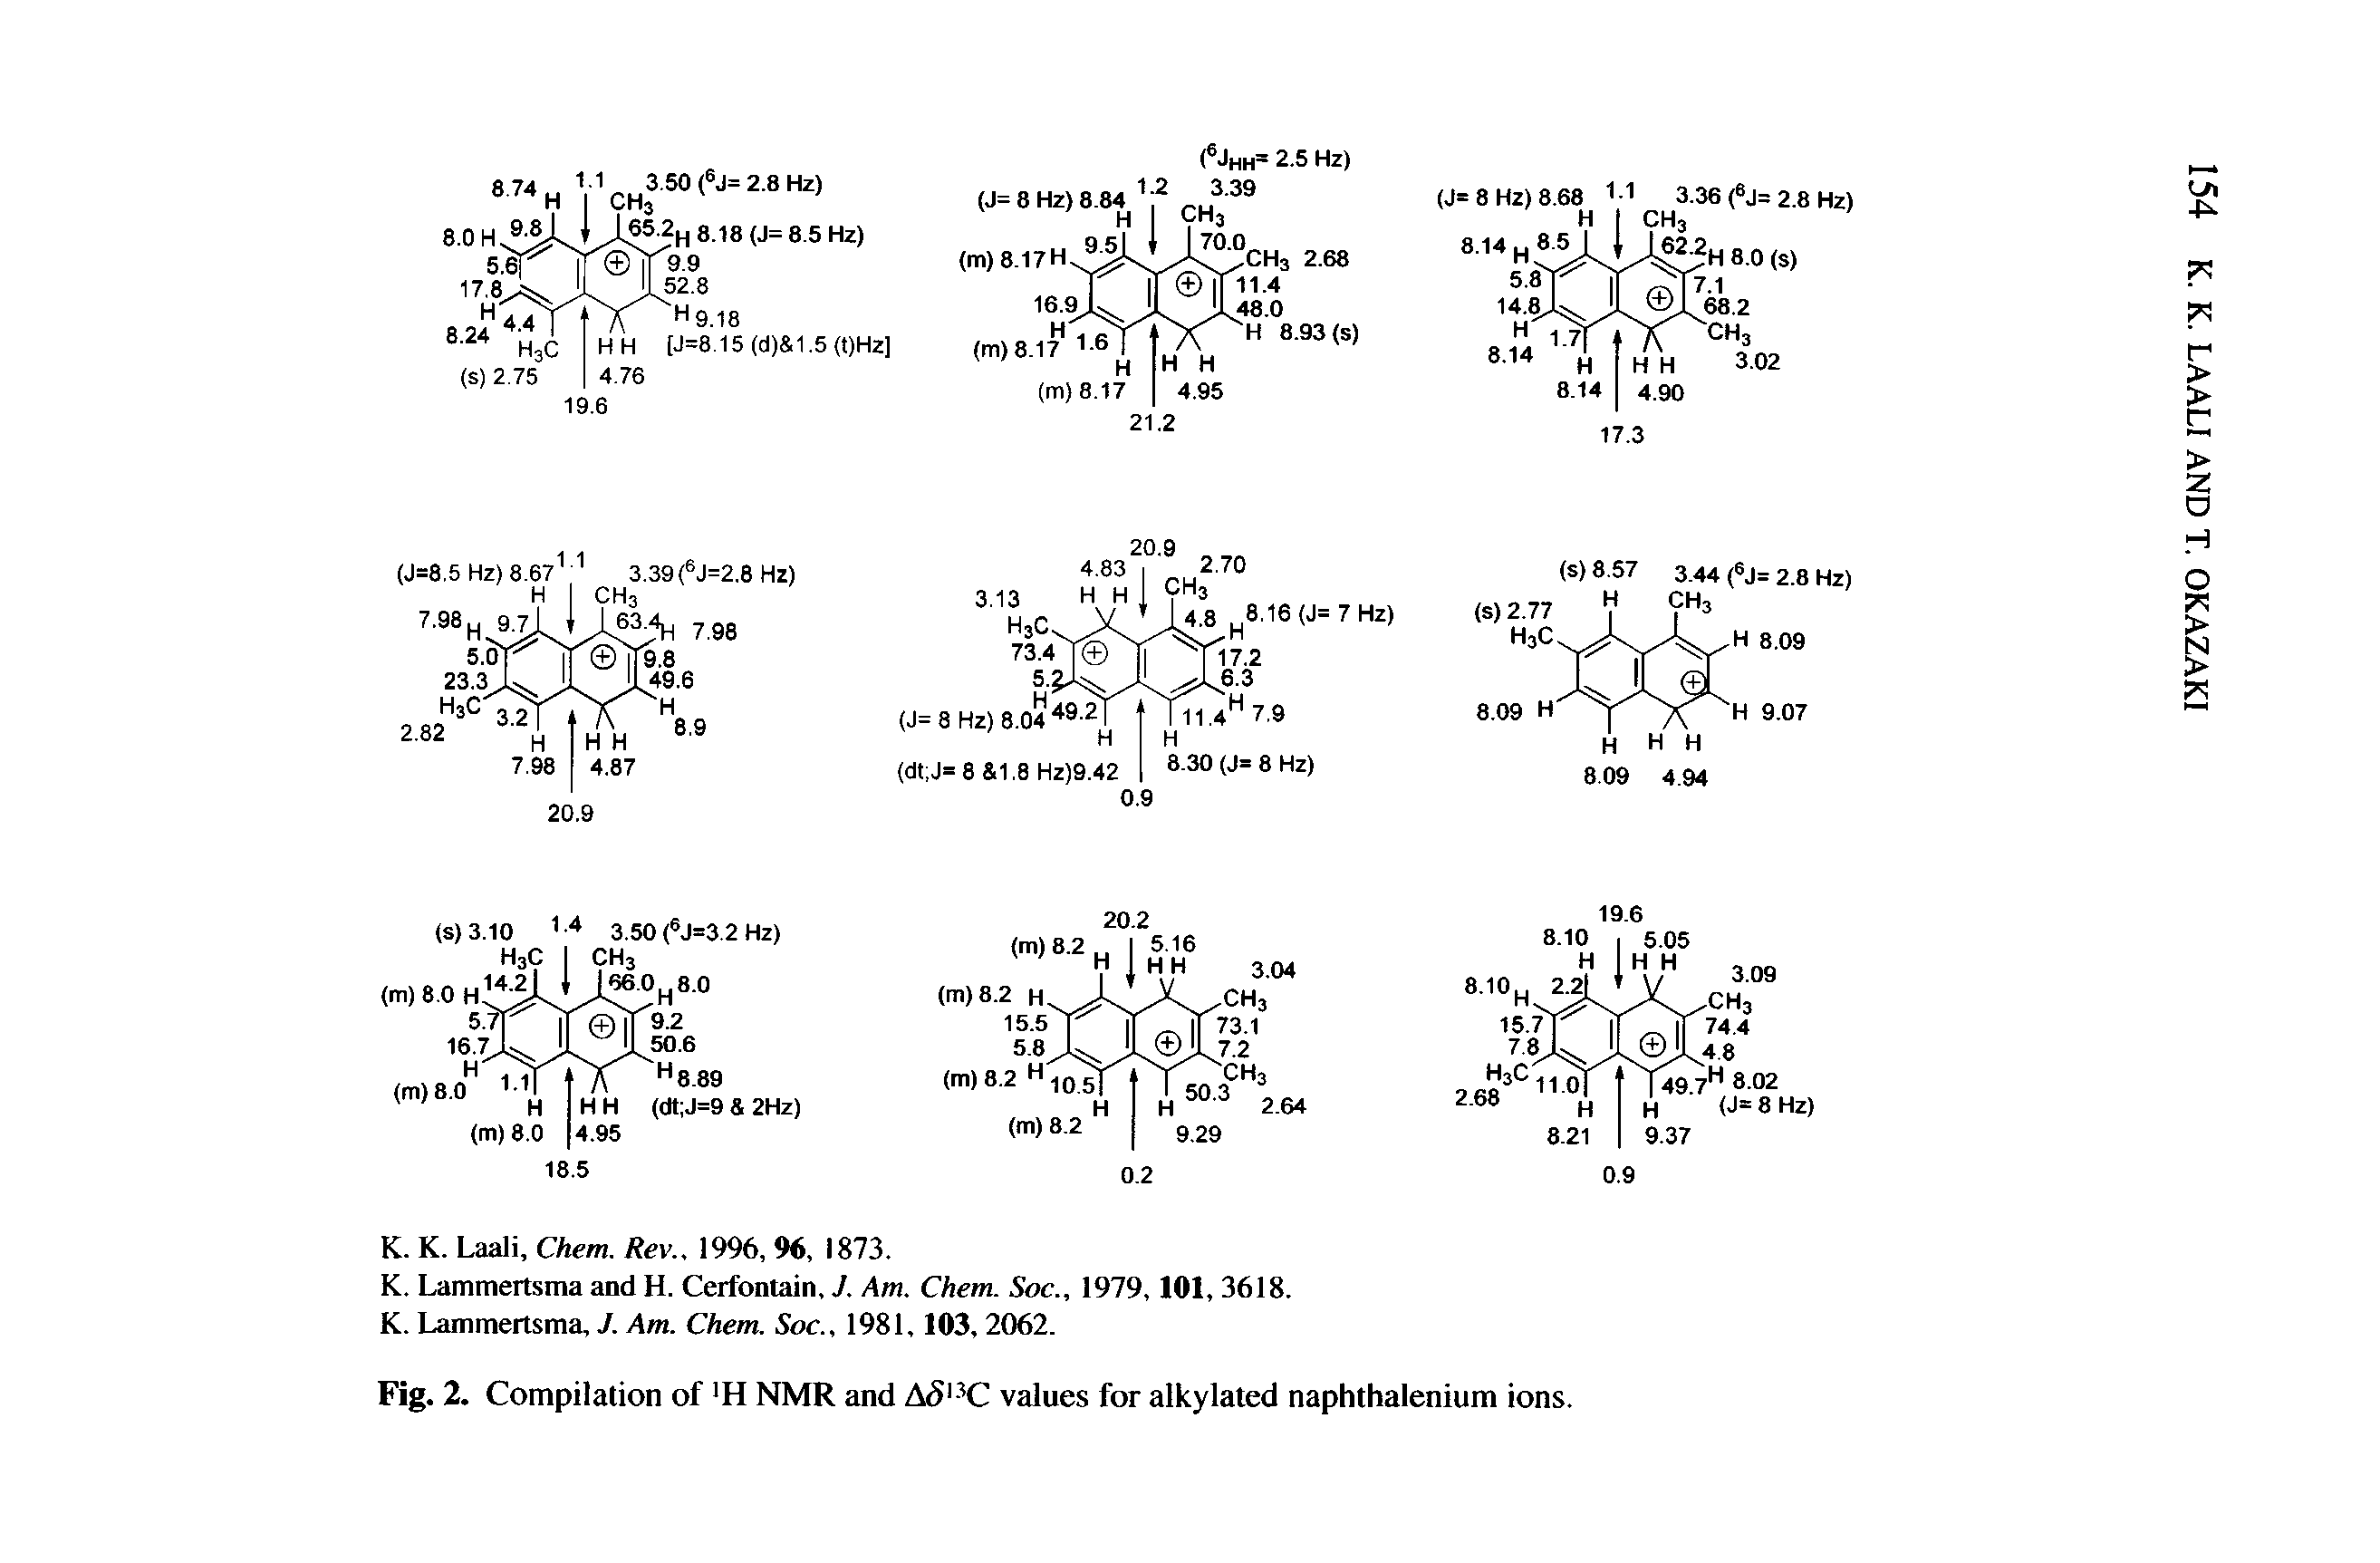 Fig. 2. Compilation of H NMR and A5I3C values for alkylated naphthalenium ions.